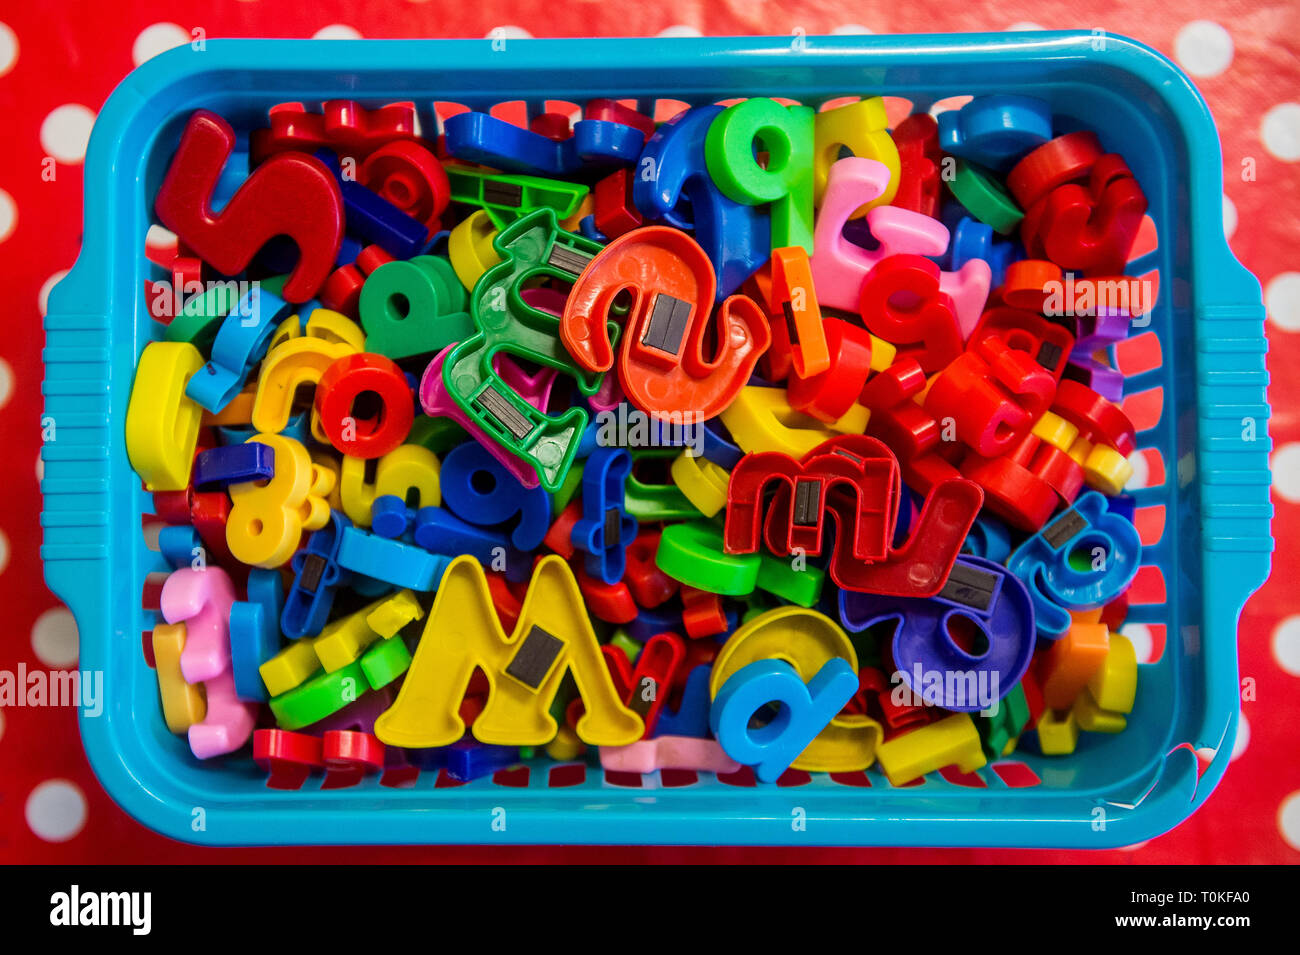 Plastic basket filled with colourful magnetic letters that you might put on a fridge or notice board Stock Photo